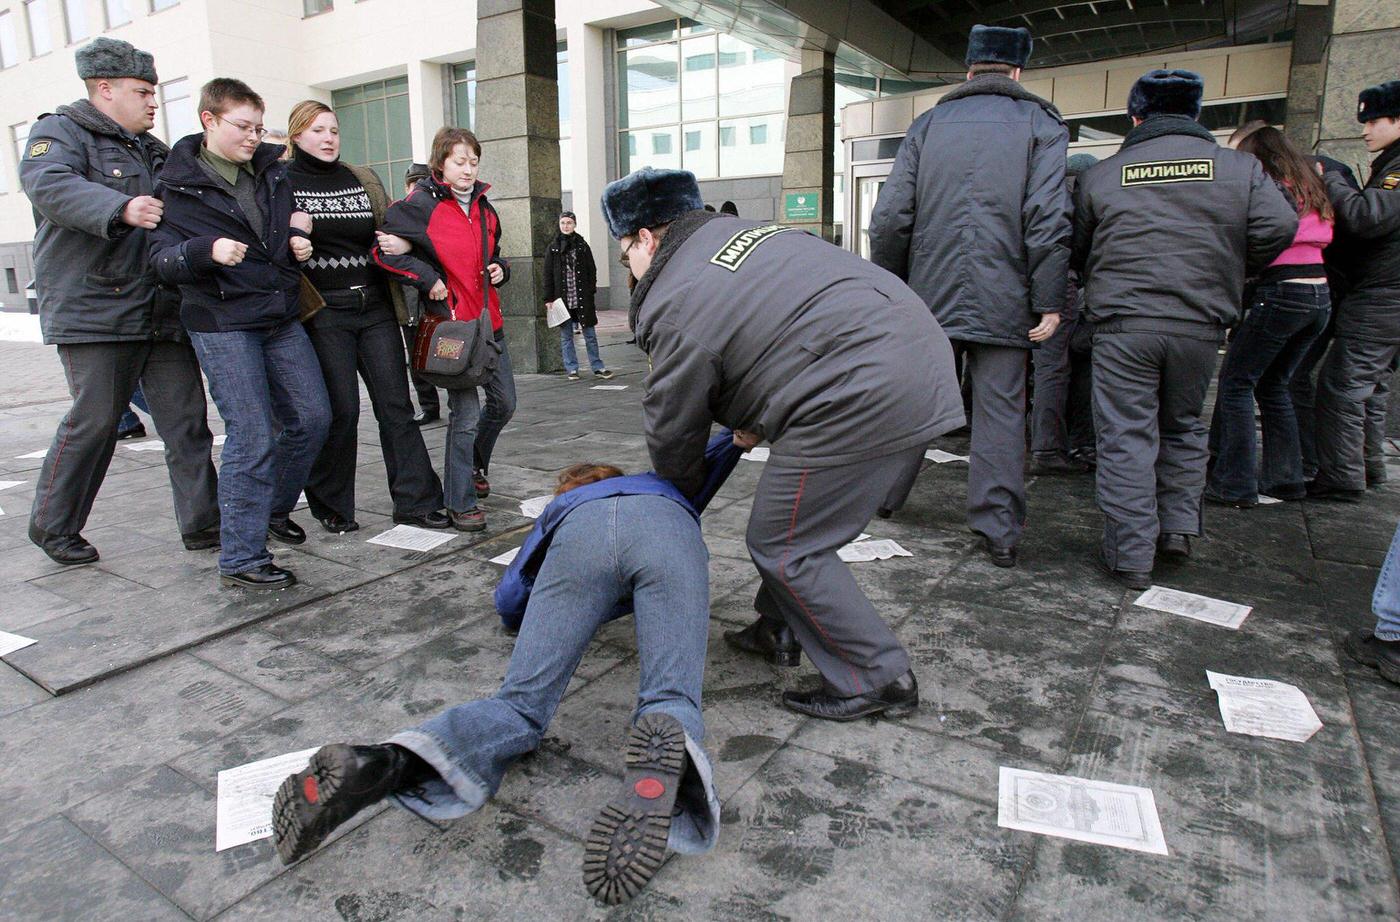 Russian police arrest National-Bolshevik Party members after protest outside "Sberbank" in Moscow. Protesters demanded compensation for savings lost during the Soviet collapse in 1991.